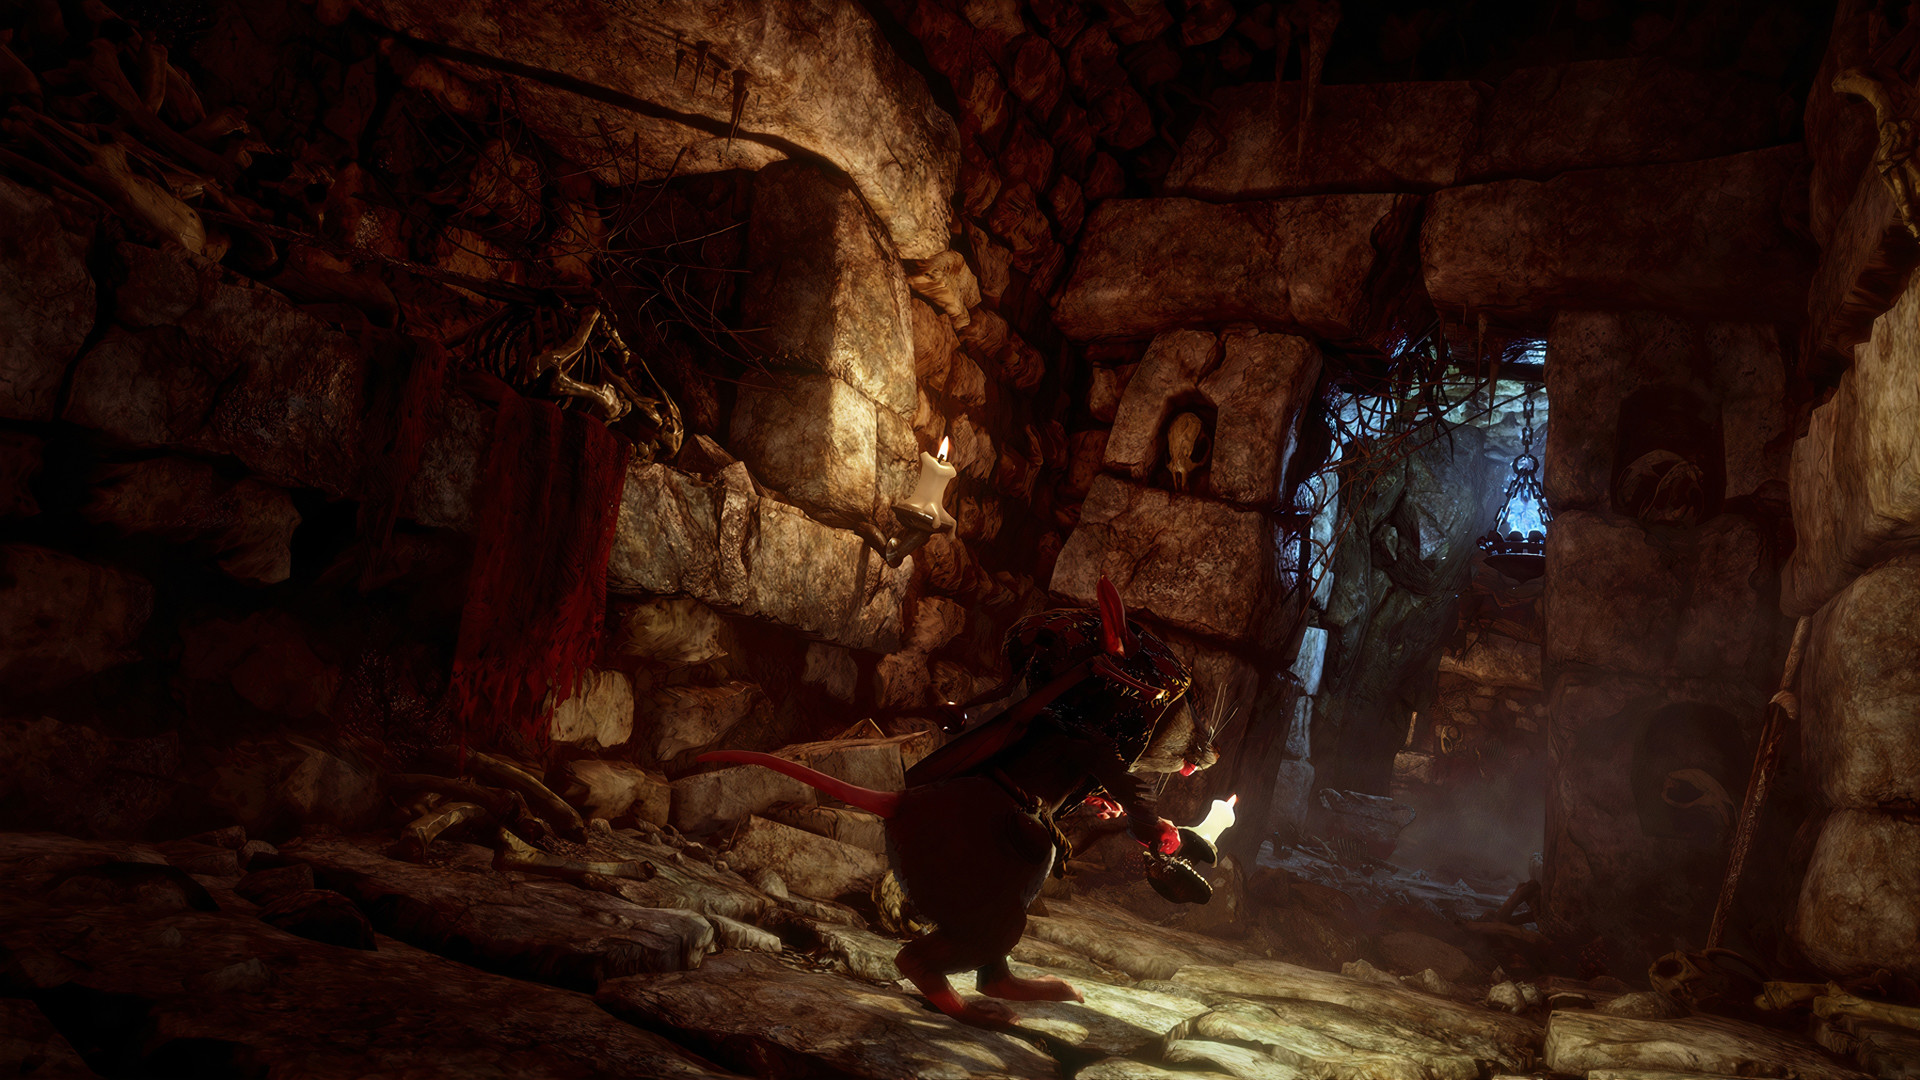 Ghost of a Tale Free Download